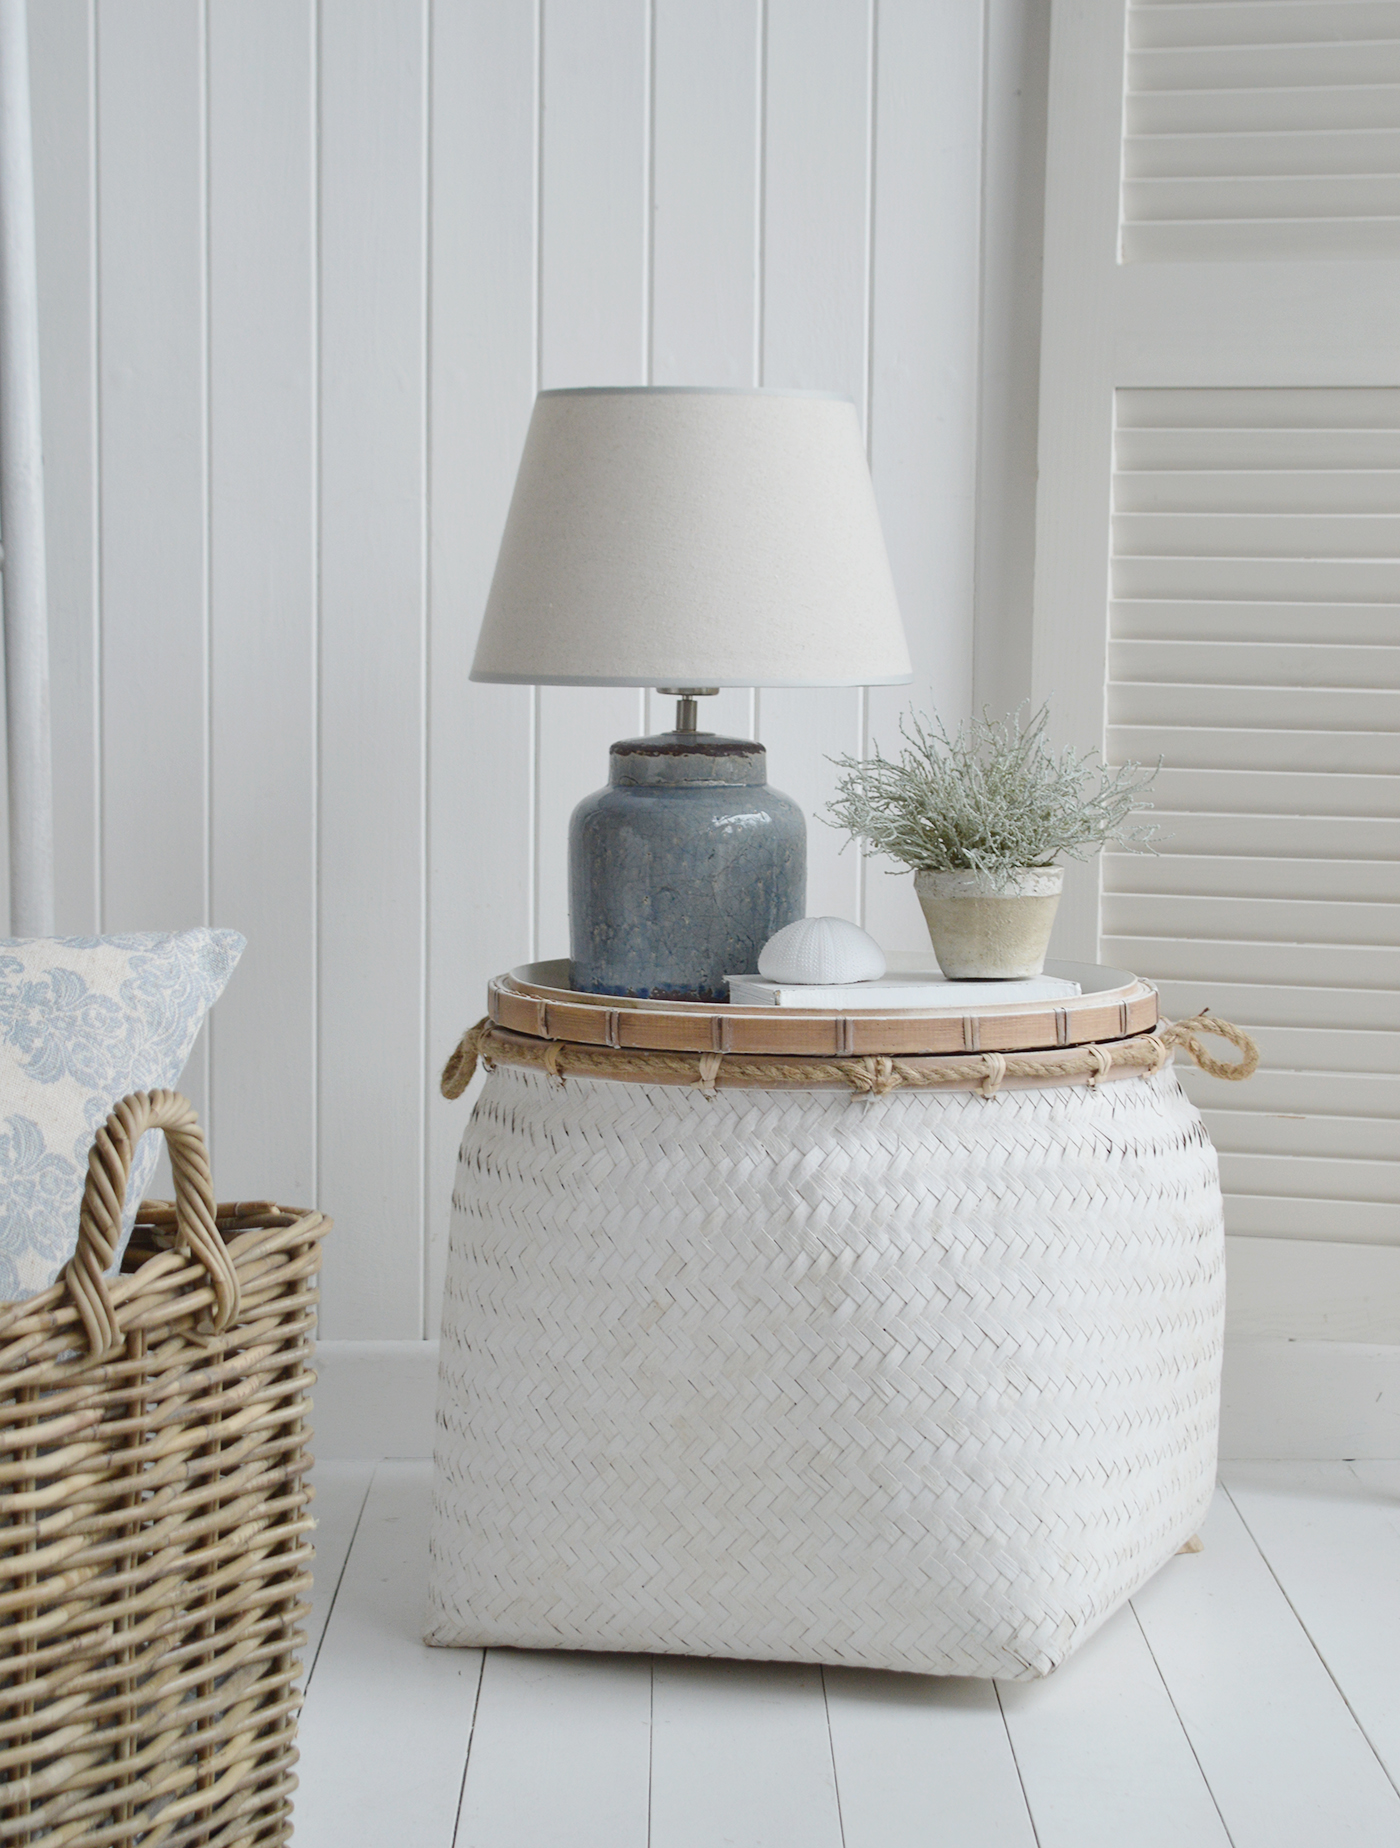 The Blue Compton lamp on the white Nantucket table, blue and white interiors for a beautiful subtle coastal interior 